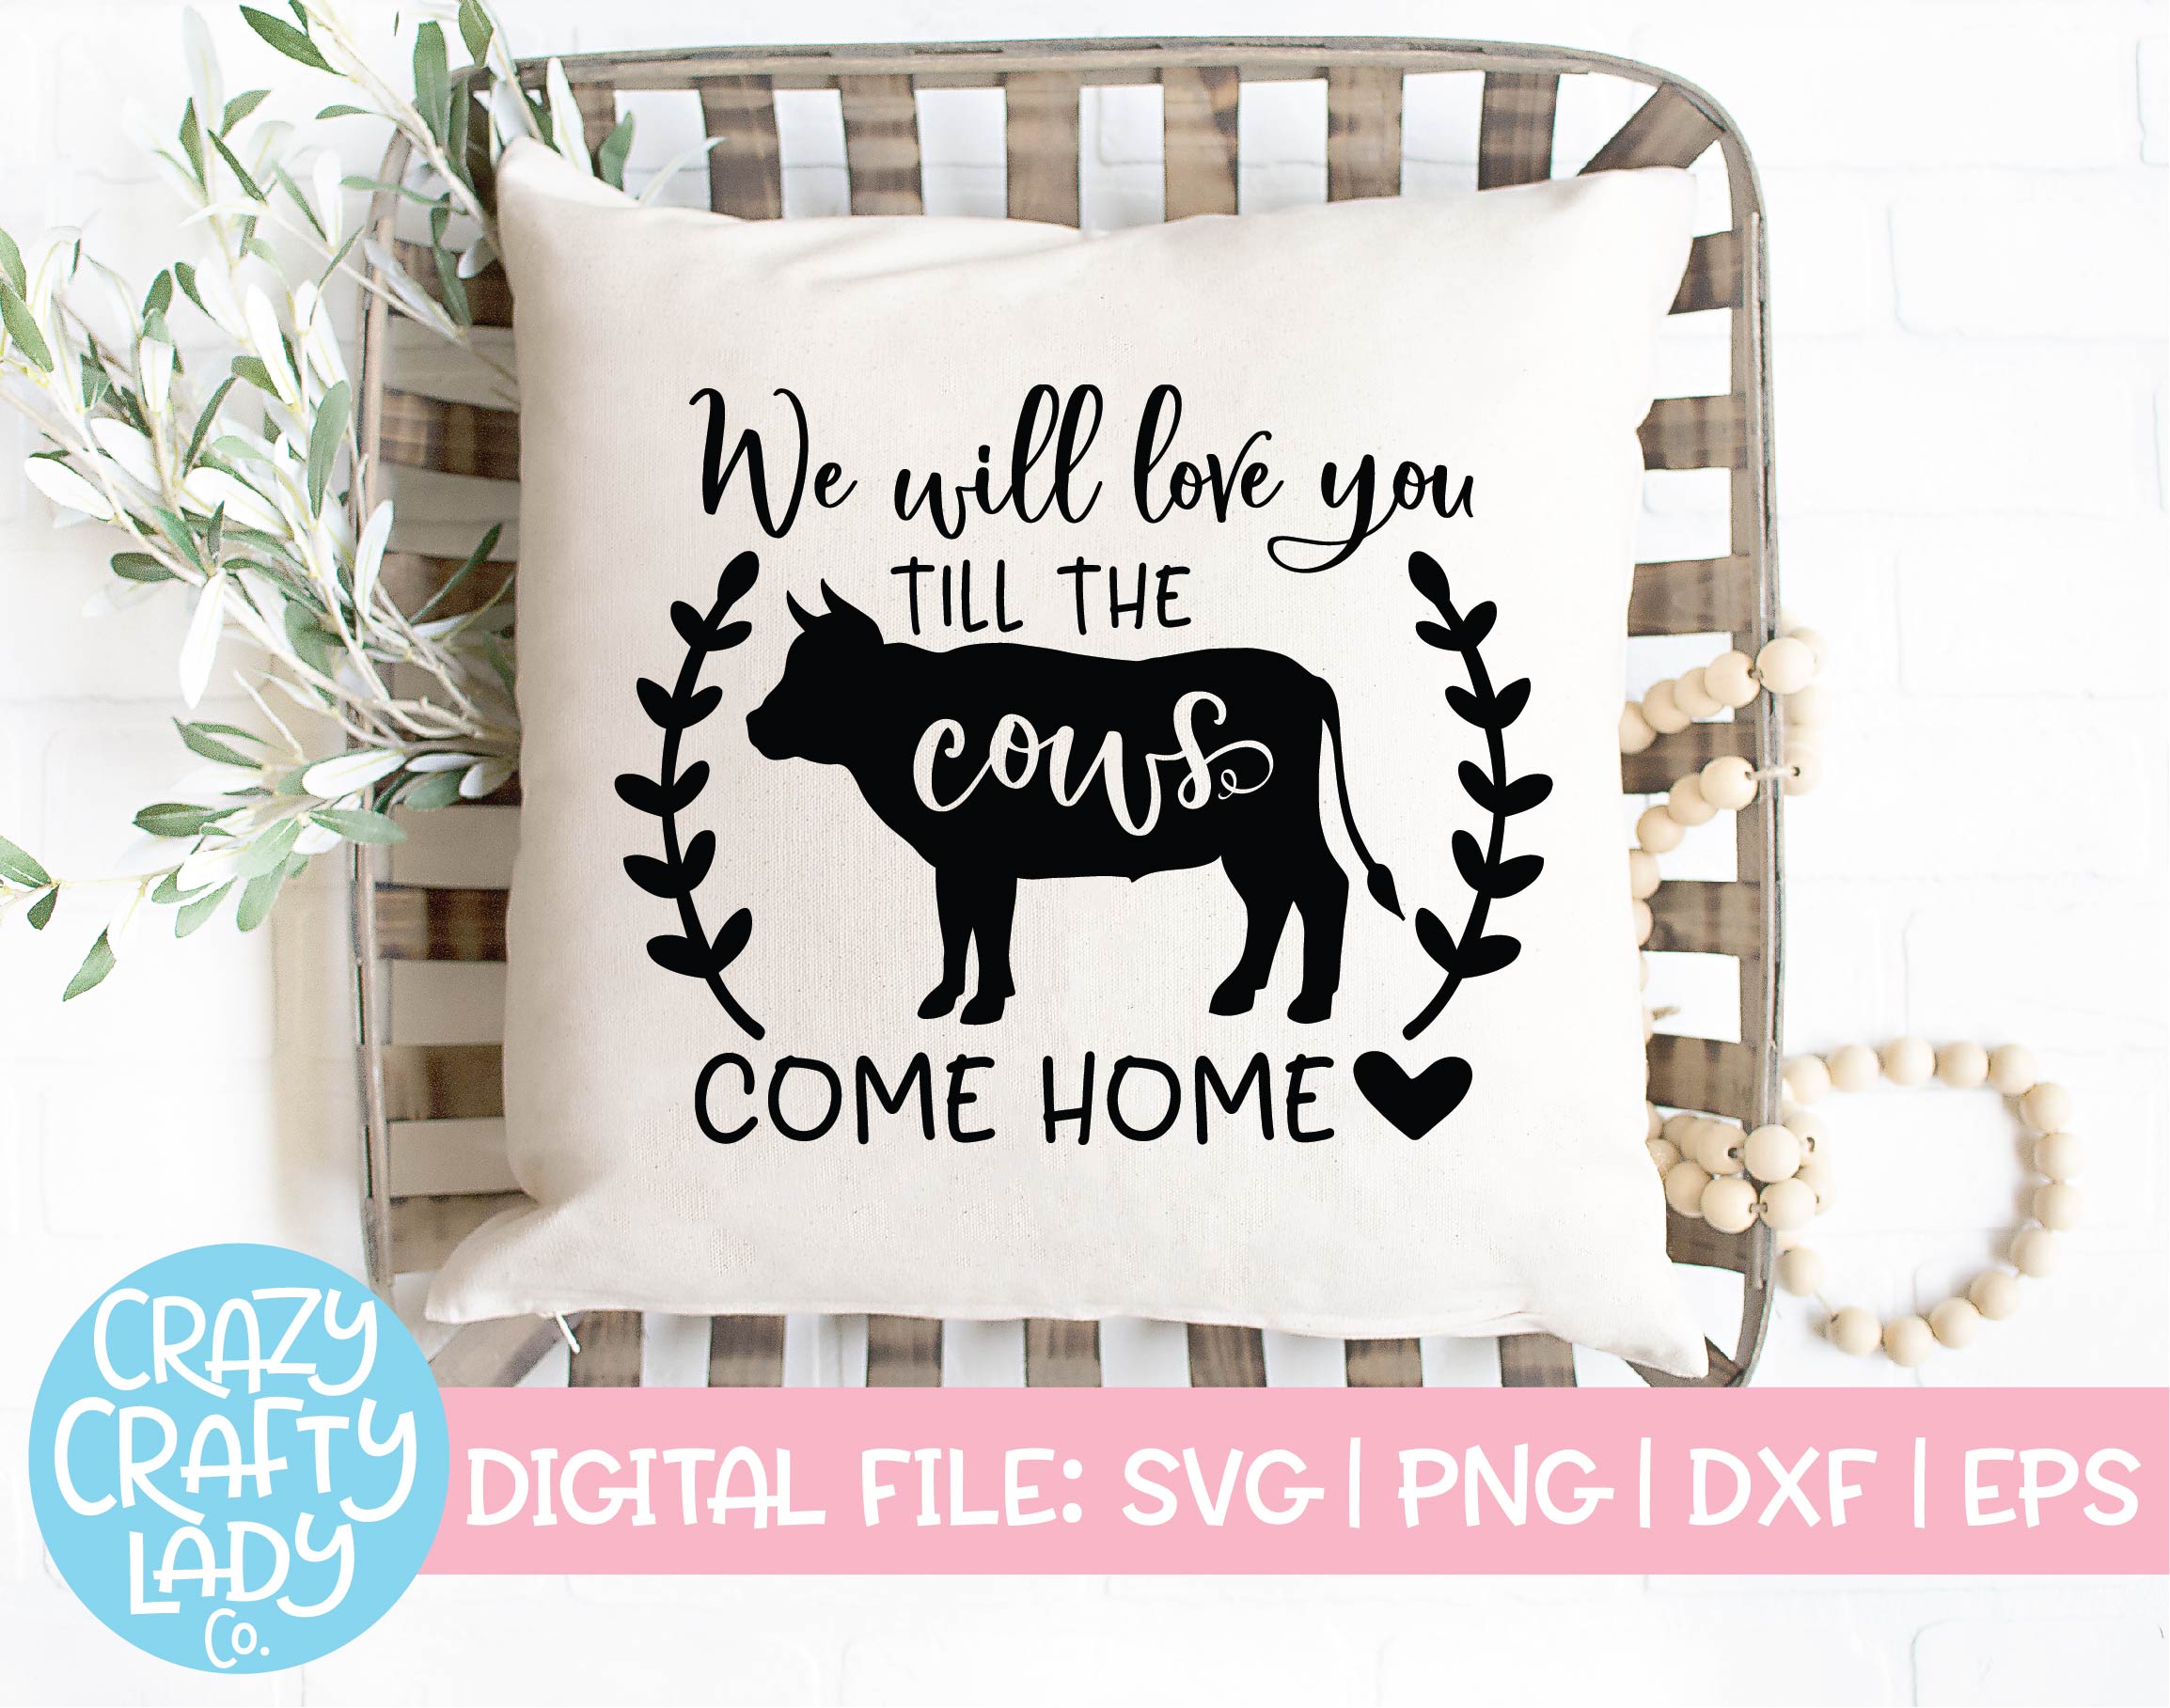 We Will Love You Till The Cows Come Home Svg Cut File Crazy Crafty Lady Co